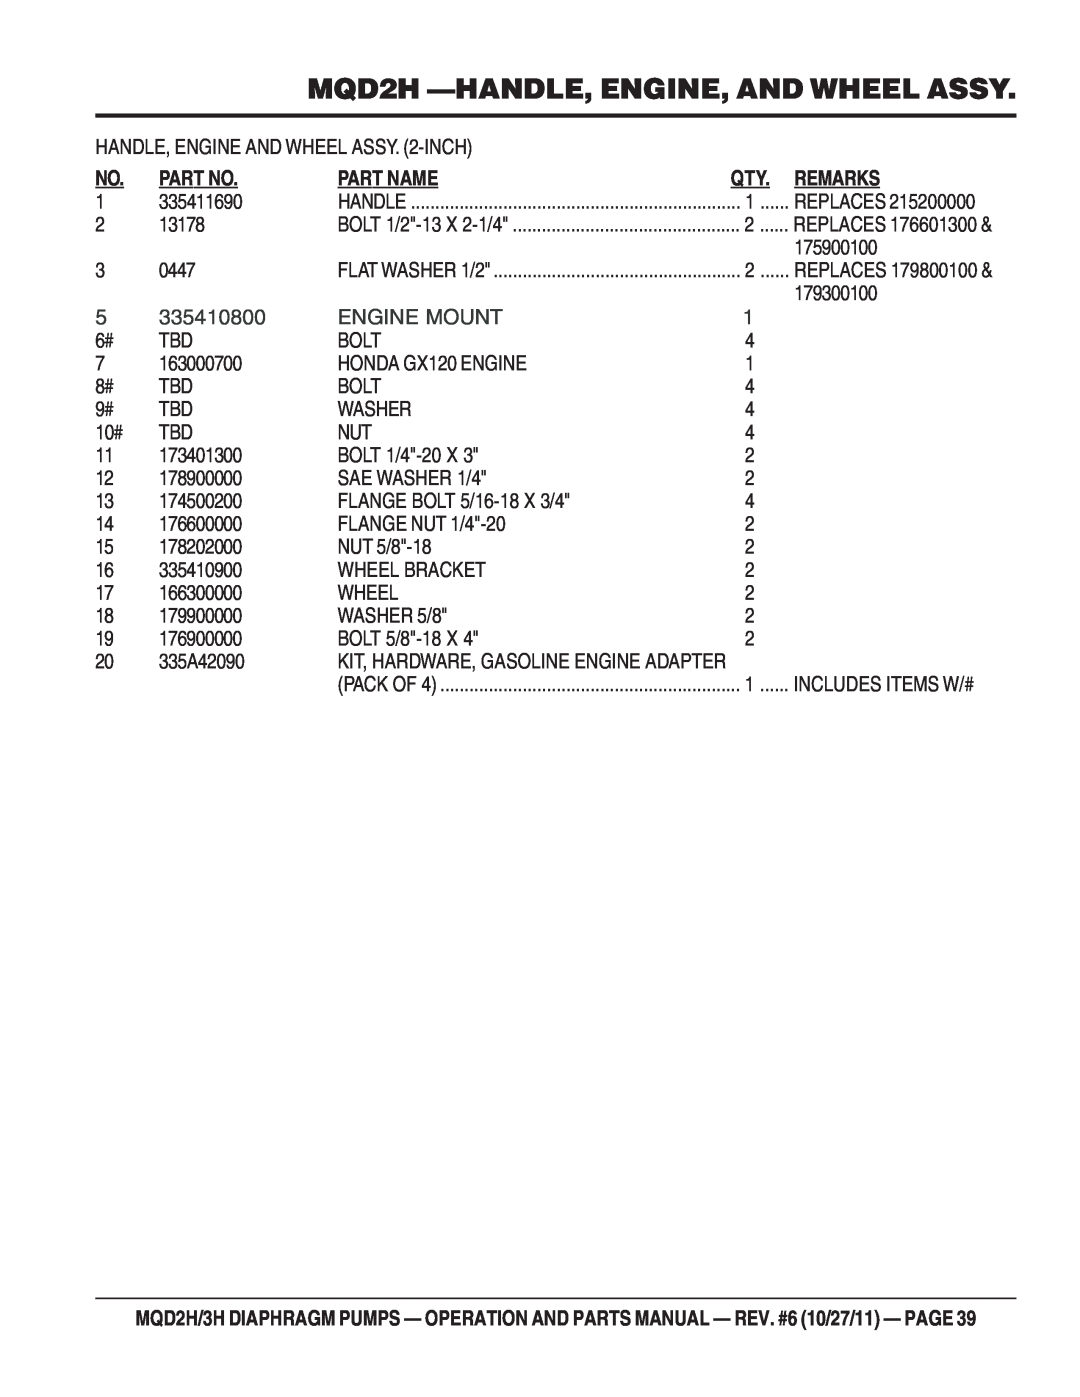 Multiquip manual MQD2H -HANDLE,ENGINE, AND WHEEL ASSY, Part Name, Remarks, 335410800, Engine Mount 